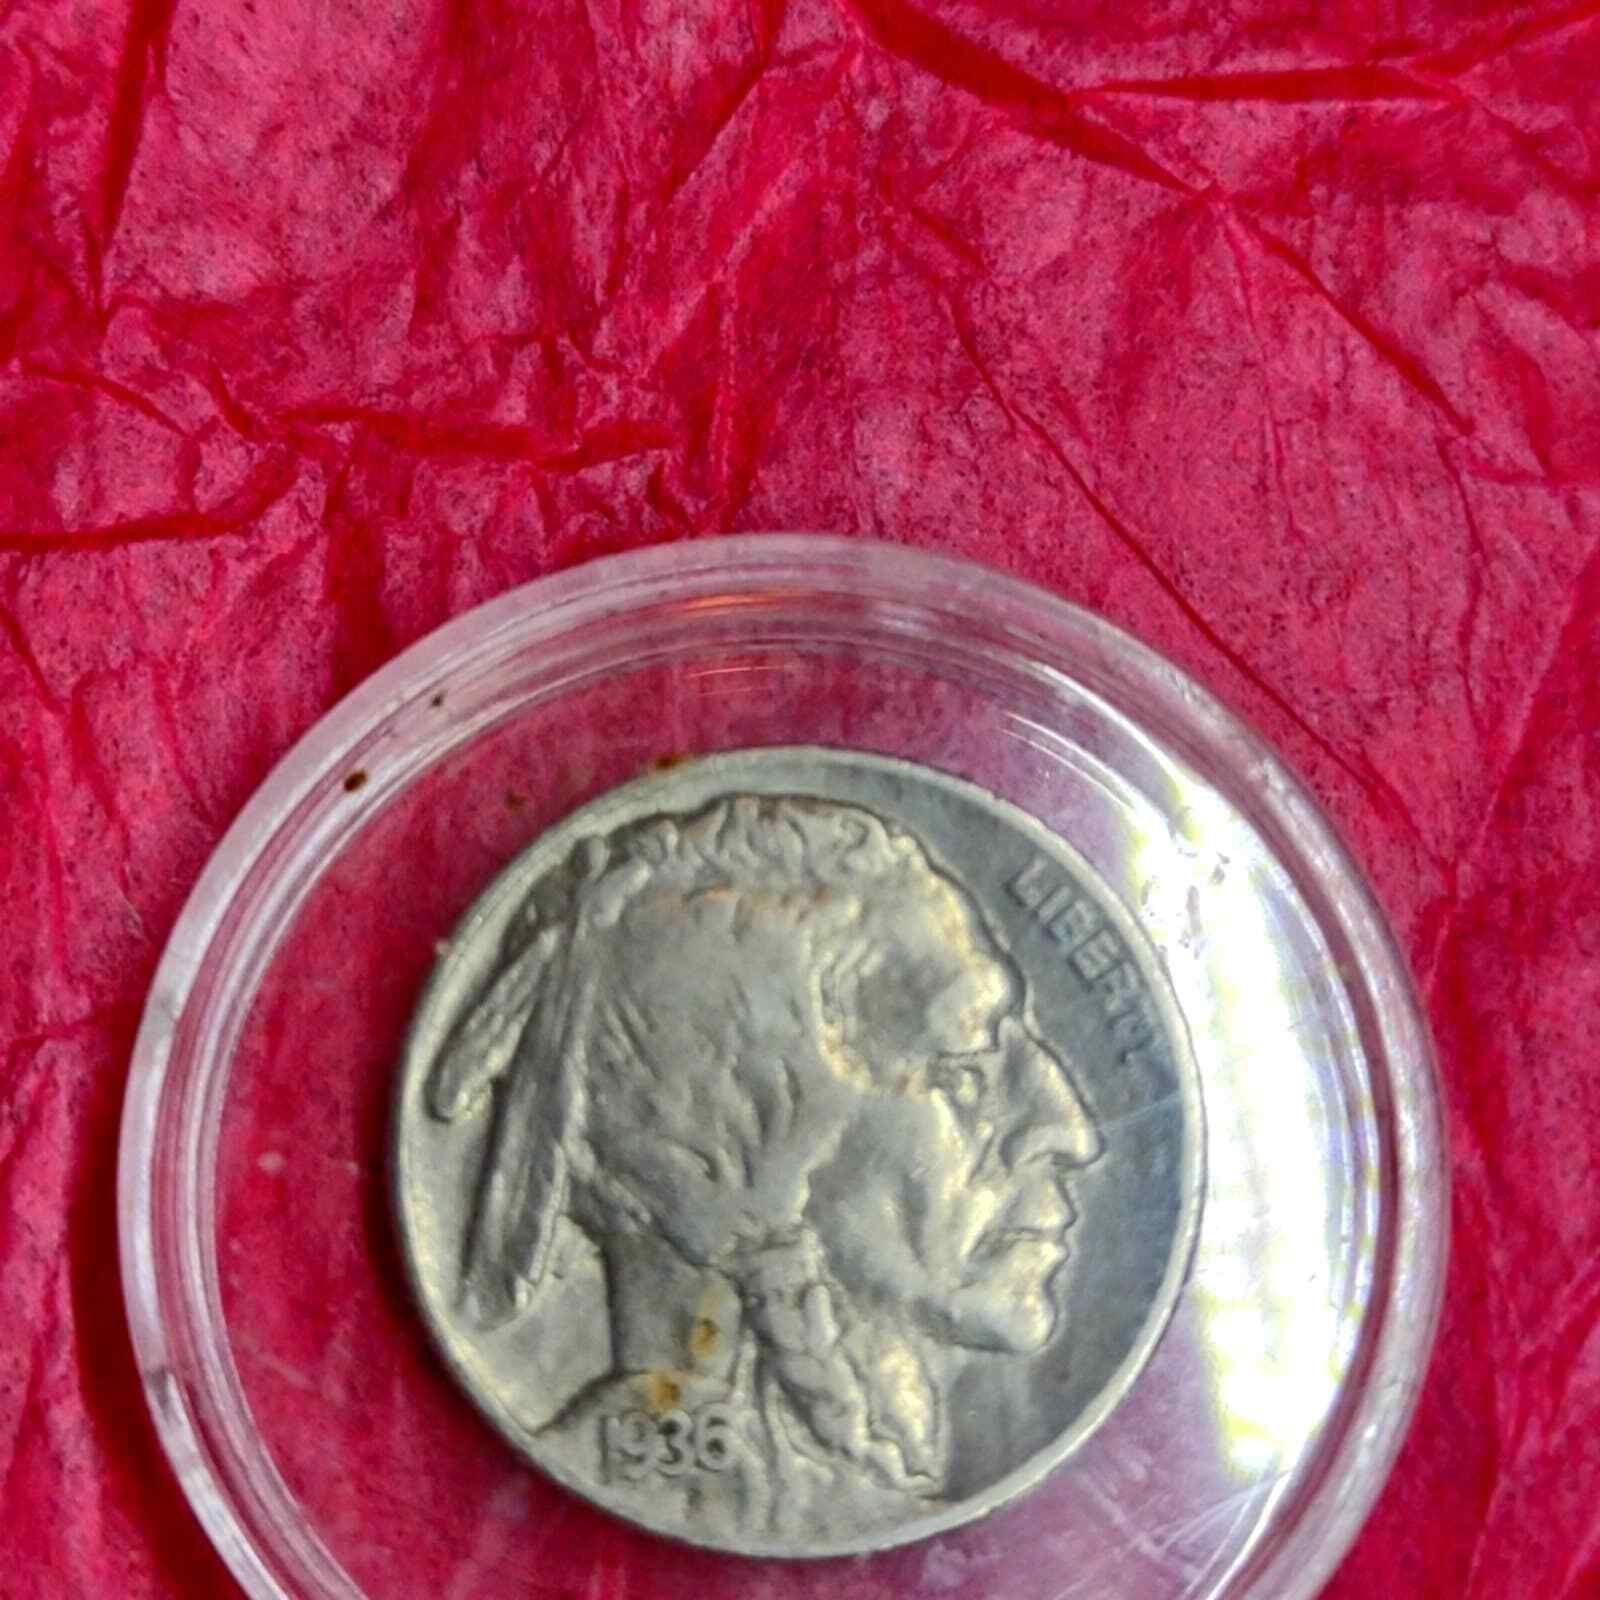 Primary image for Antique 1936 d Buffalo nickel in great shape!